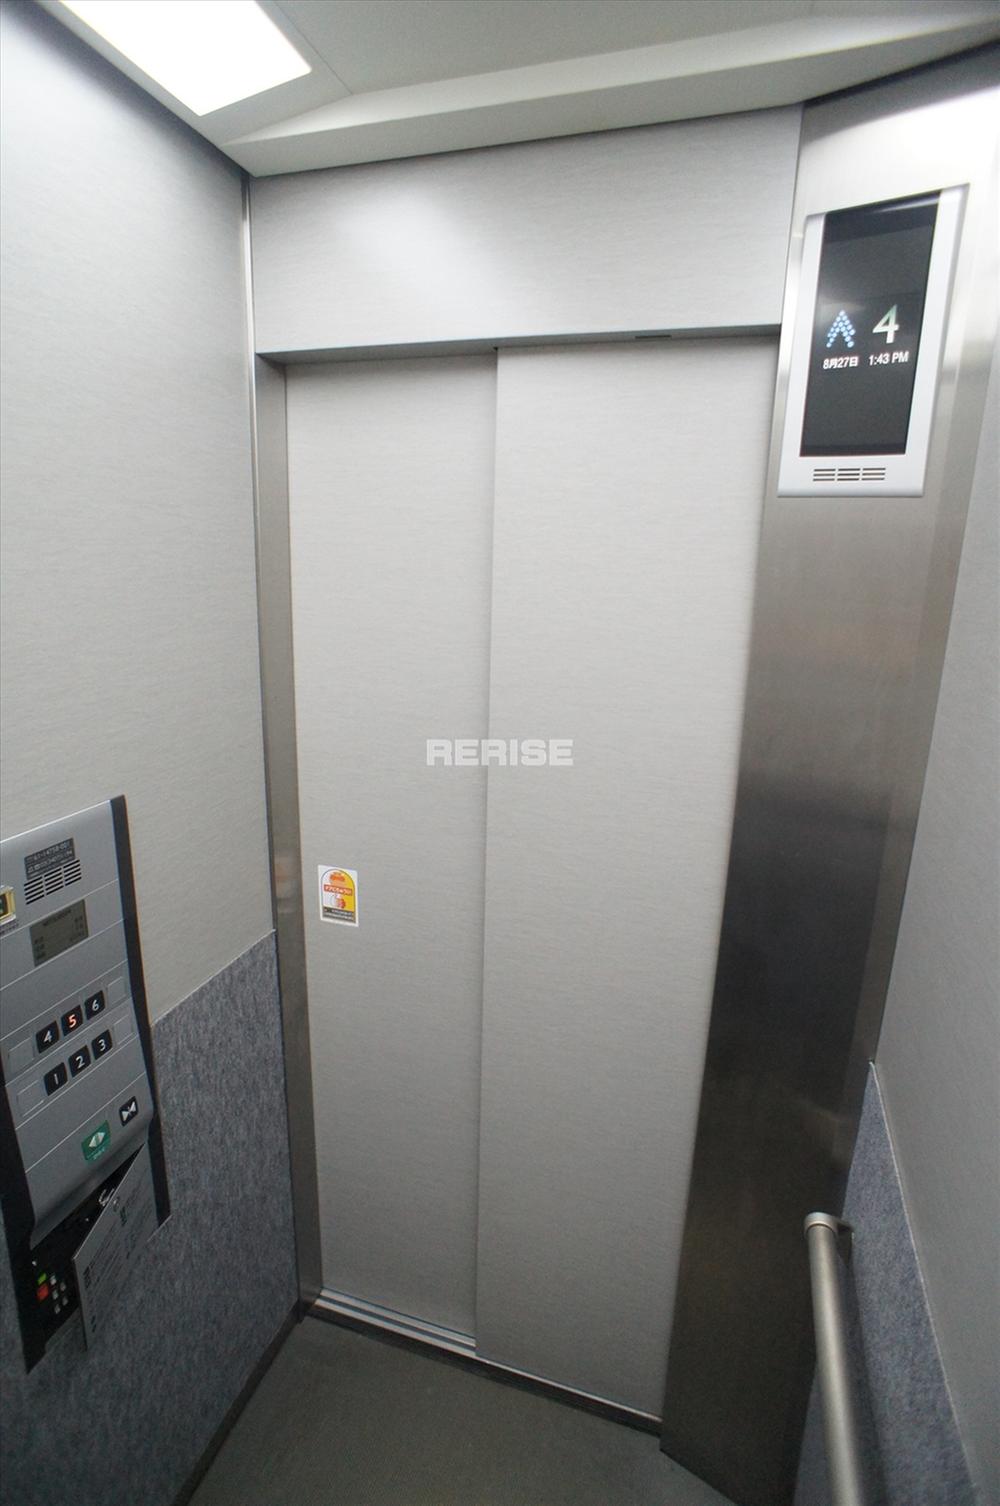 Other common areas. In Elevator